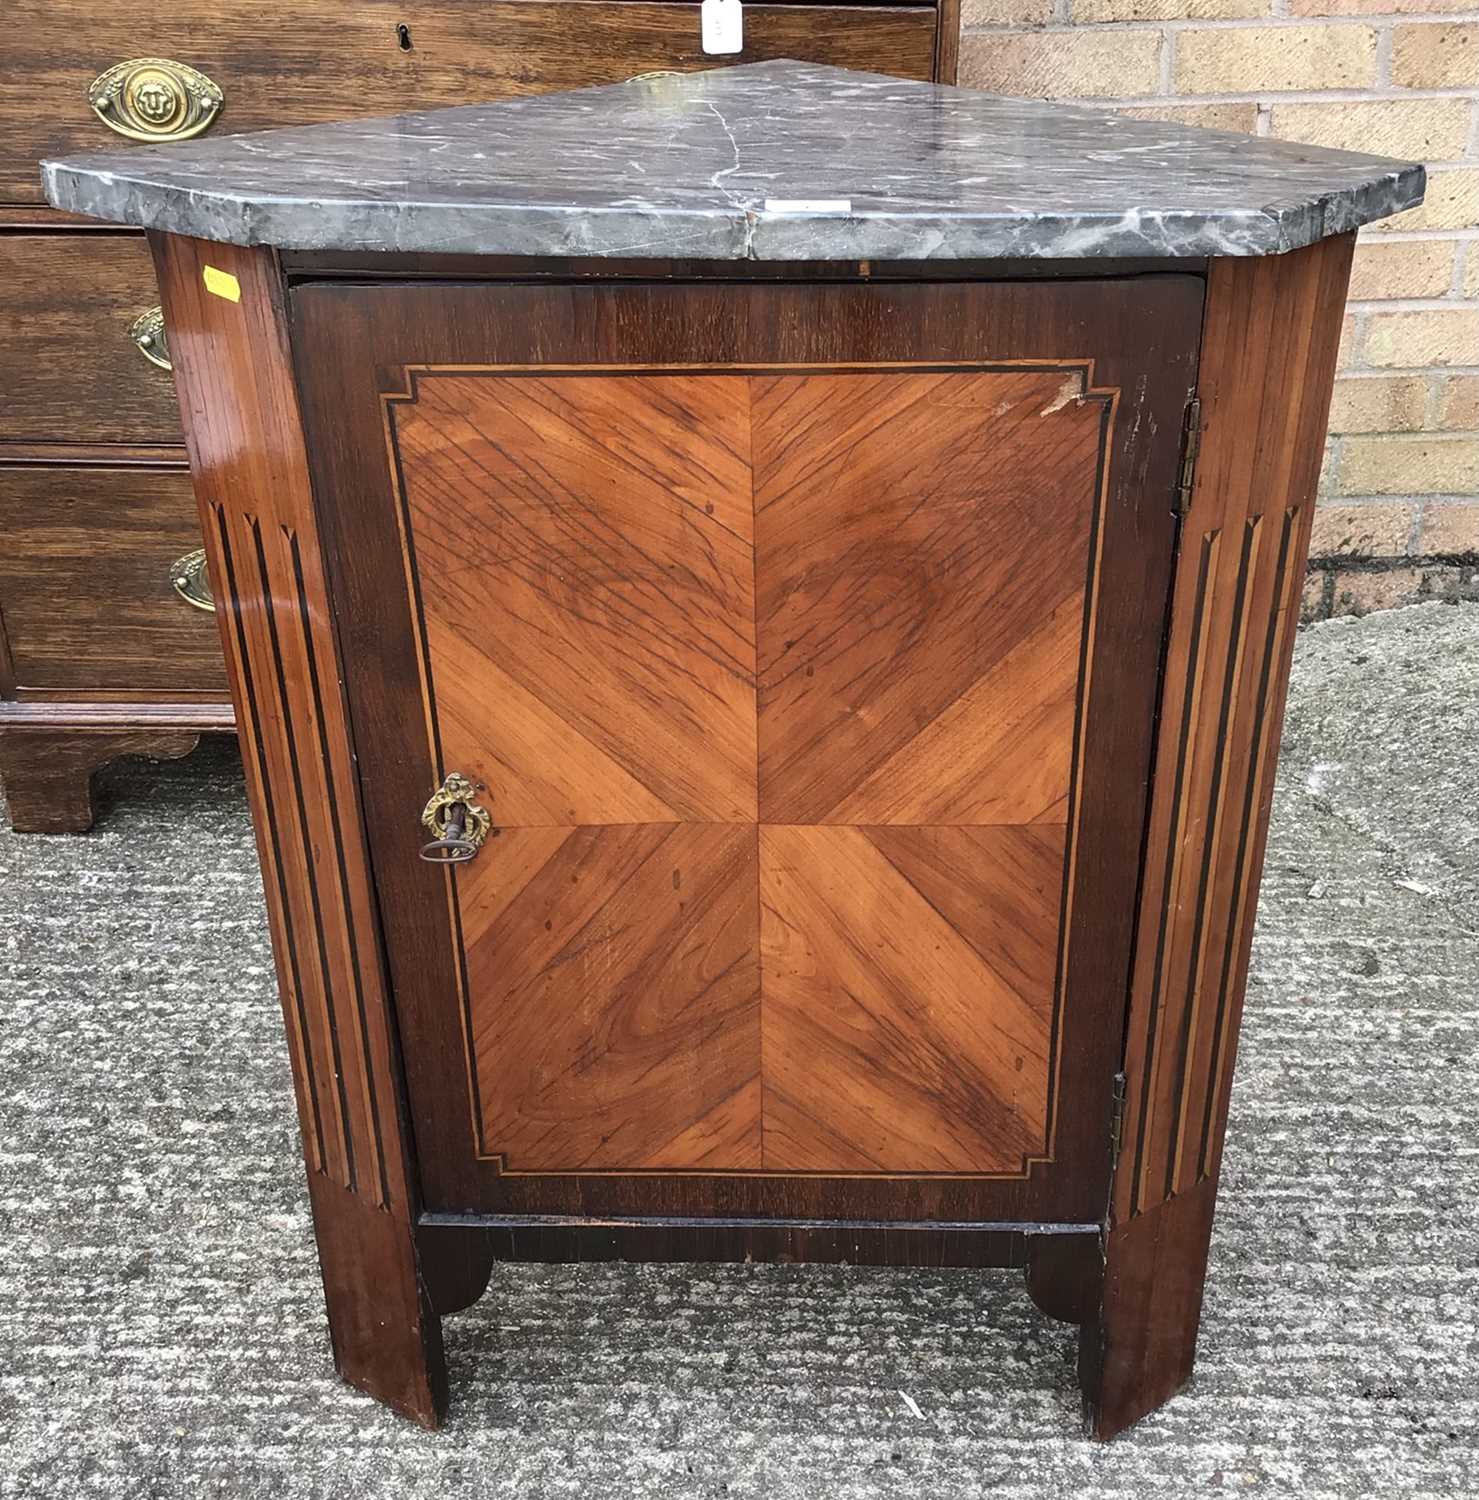 Lot 913 - 19th century Continental rosewood and kingwood corner cupboard, with marble top (broken), inlaid panels and block feet